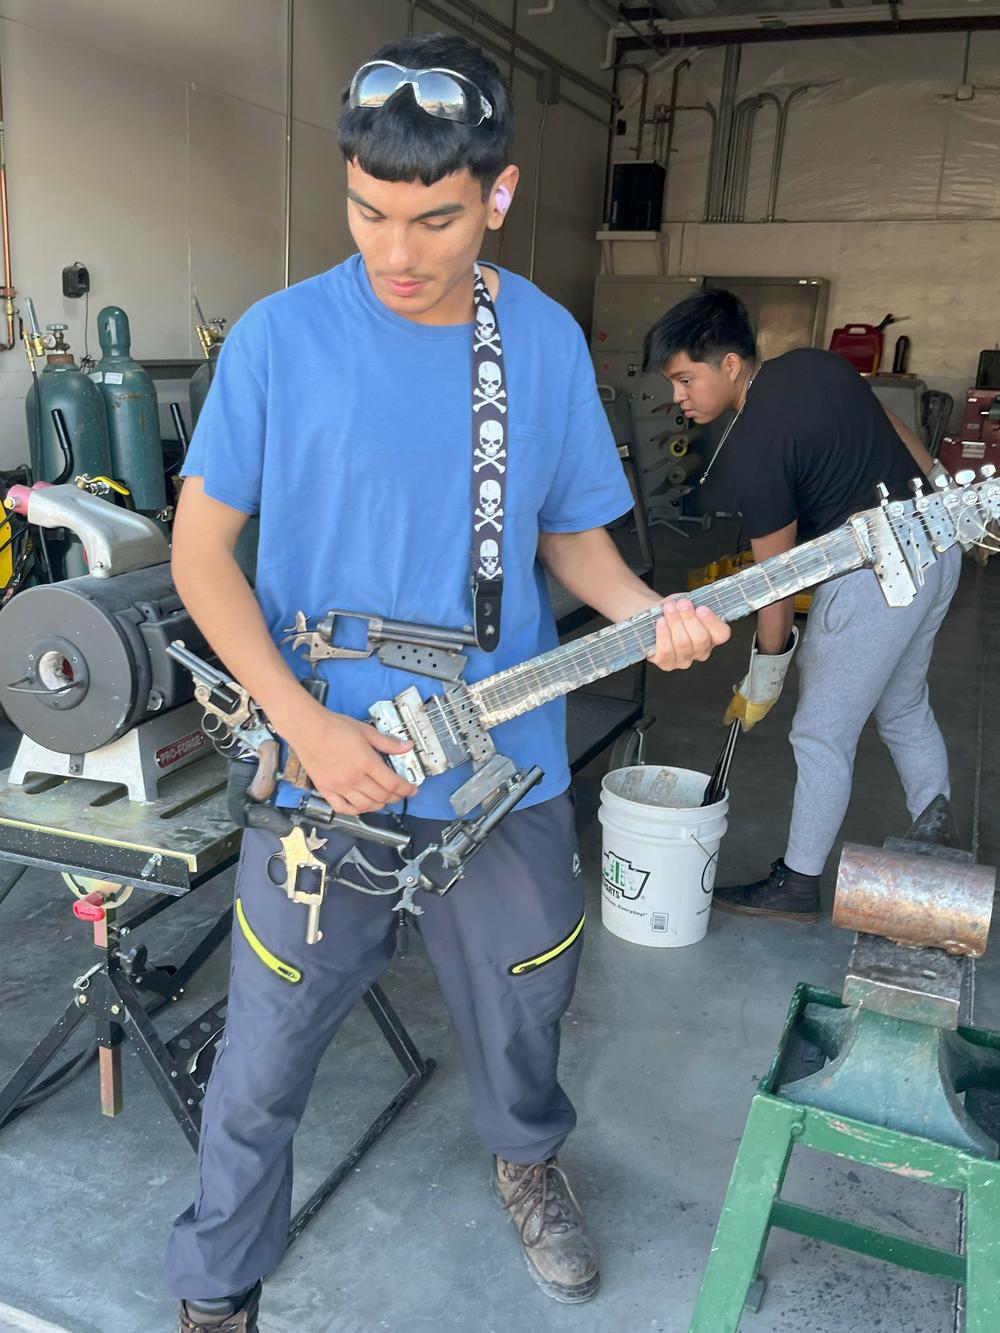 Nathan Alvarez, 18, shows off a functioning guitar that students at an after-class program at RFK Charter School in Albuquerque, N.M., welded together out of old guns.